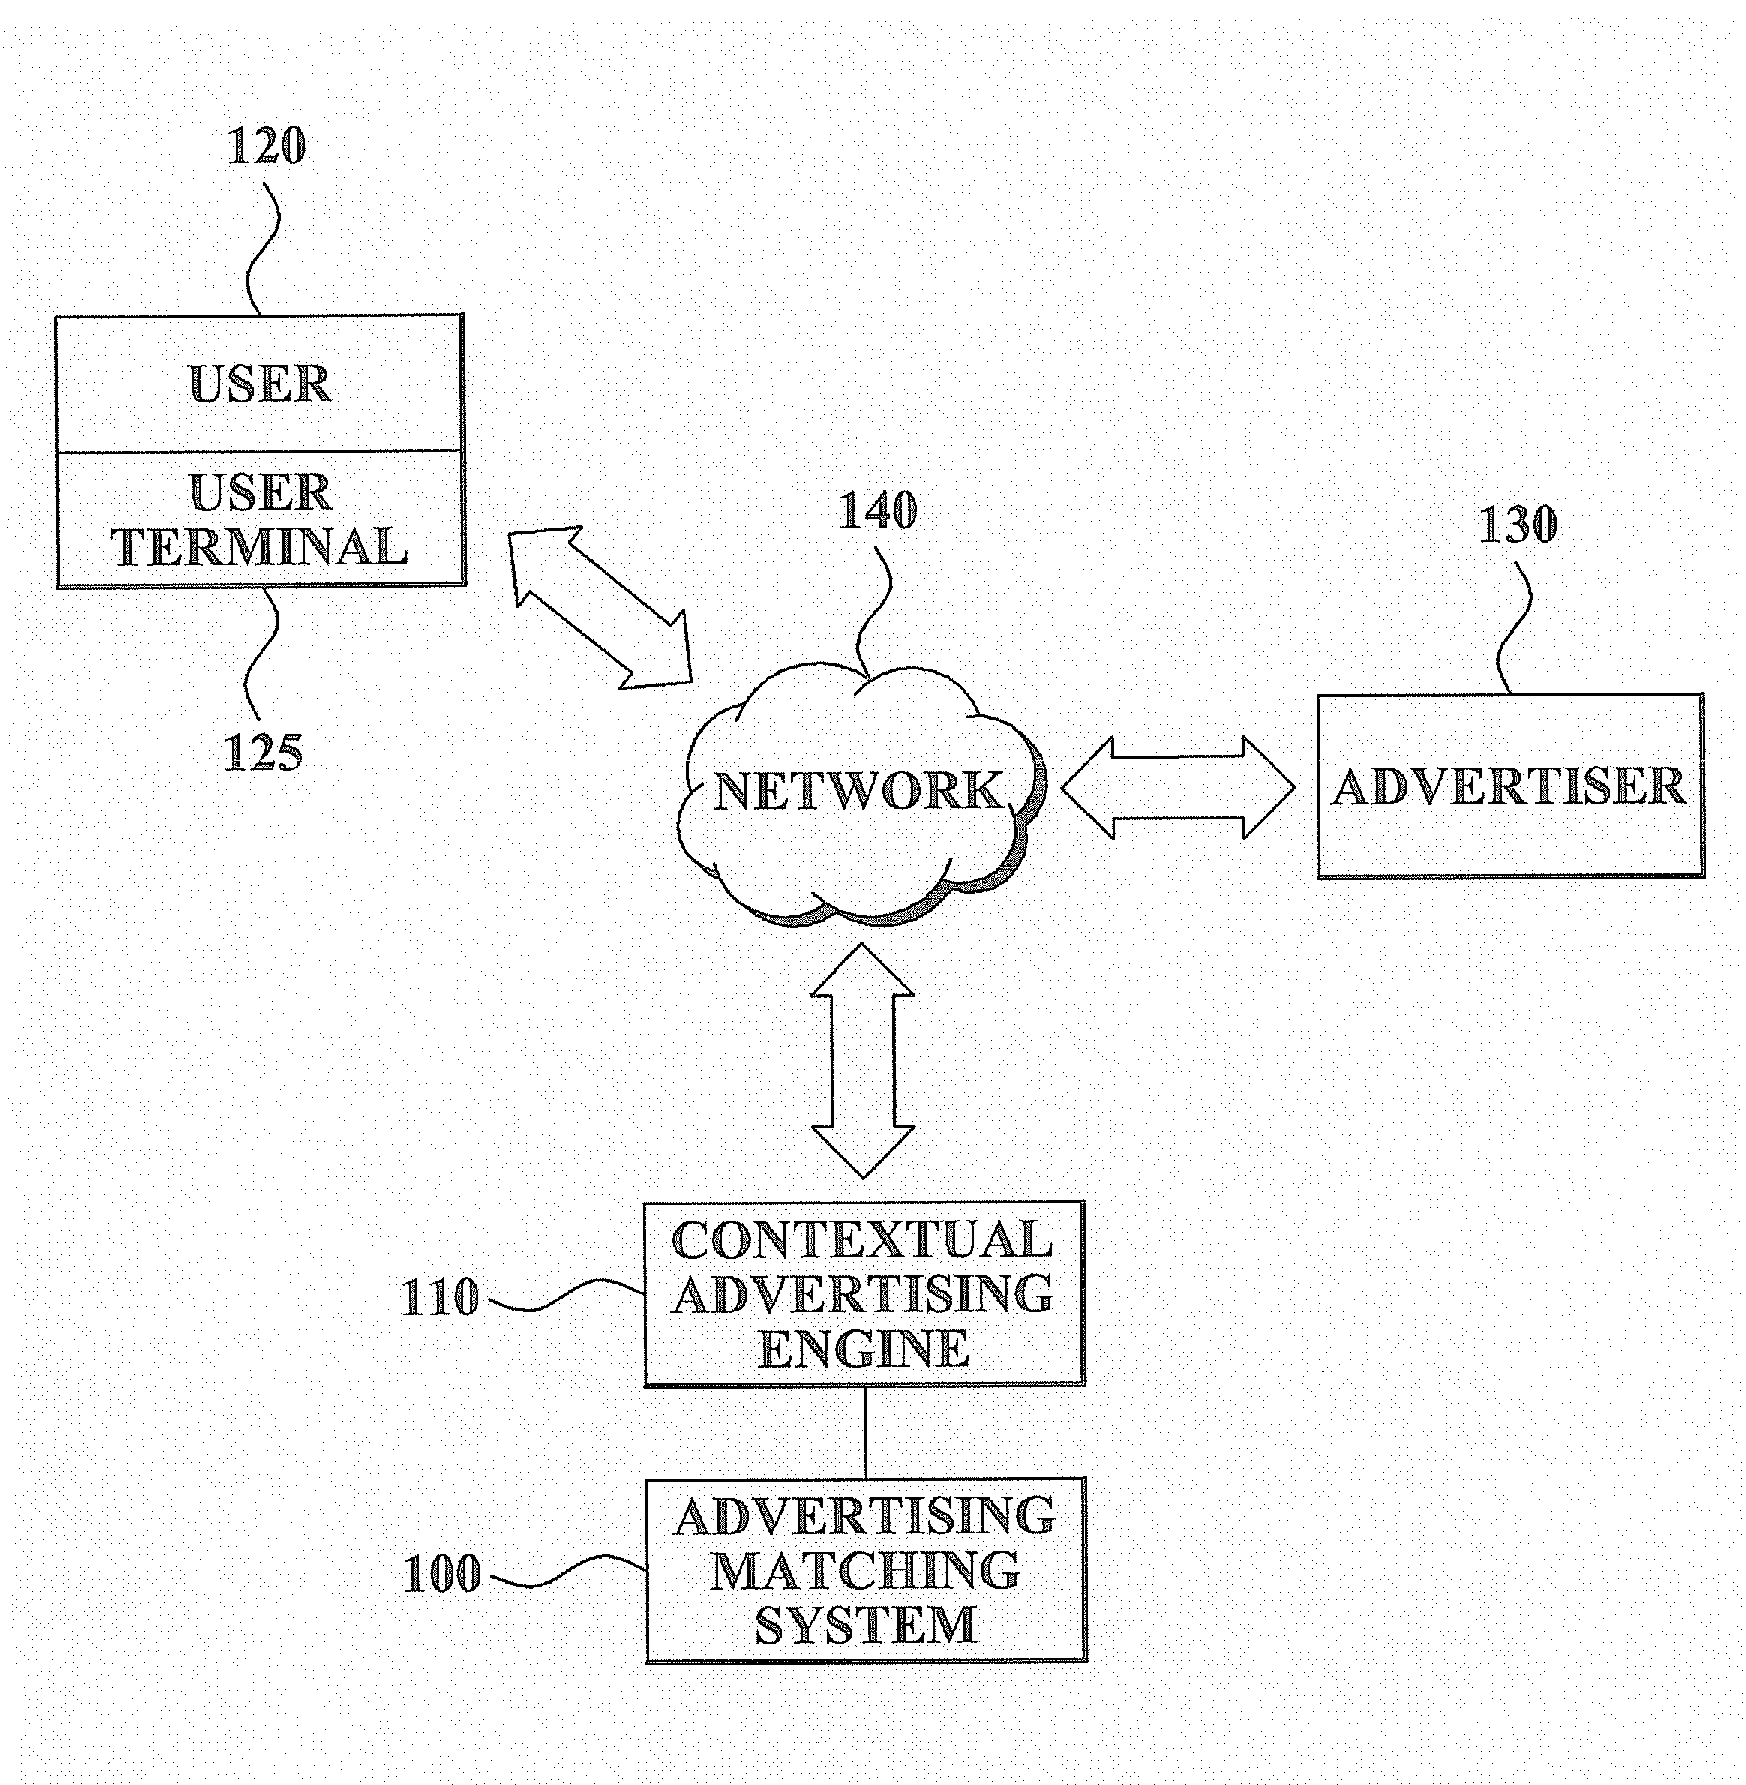 Method and system for matching advertising using seed